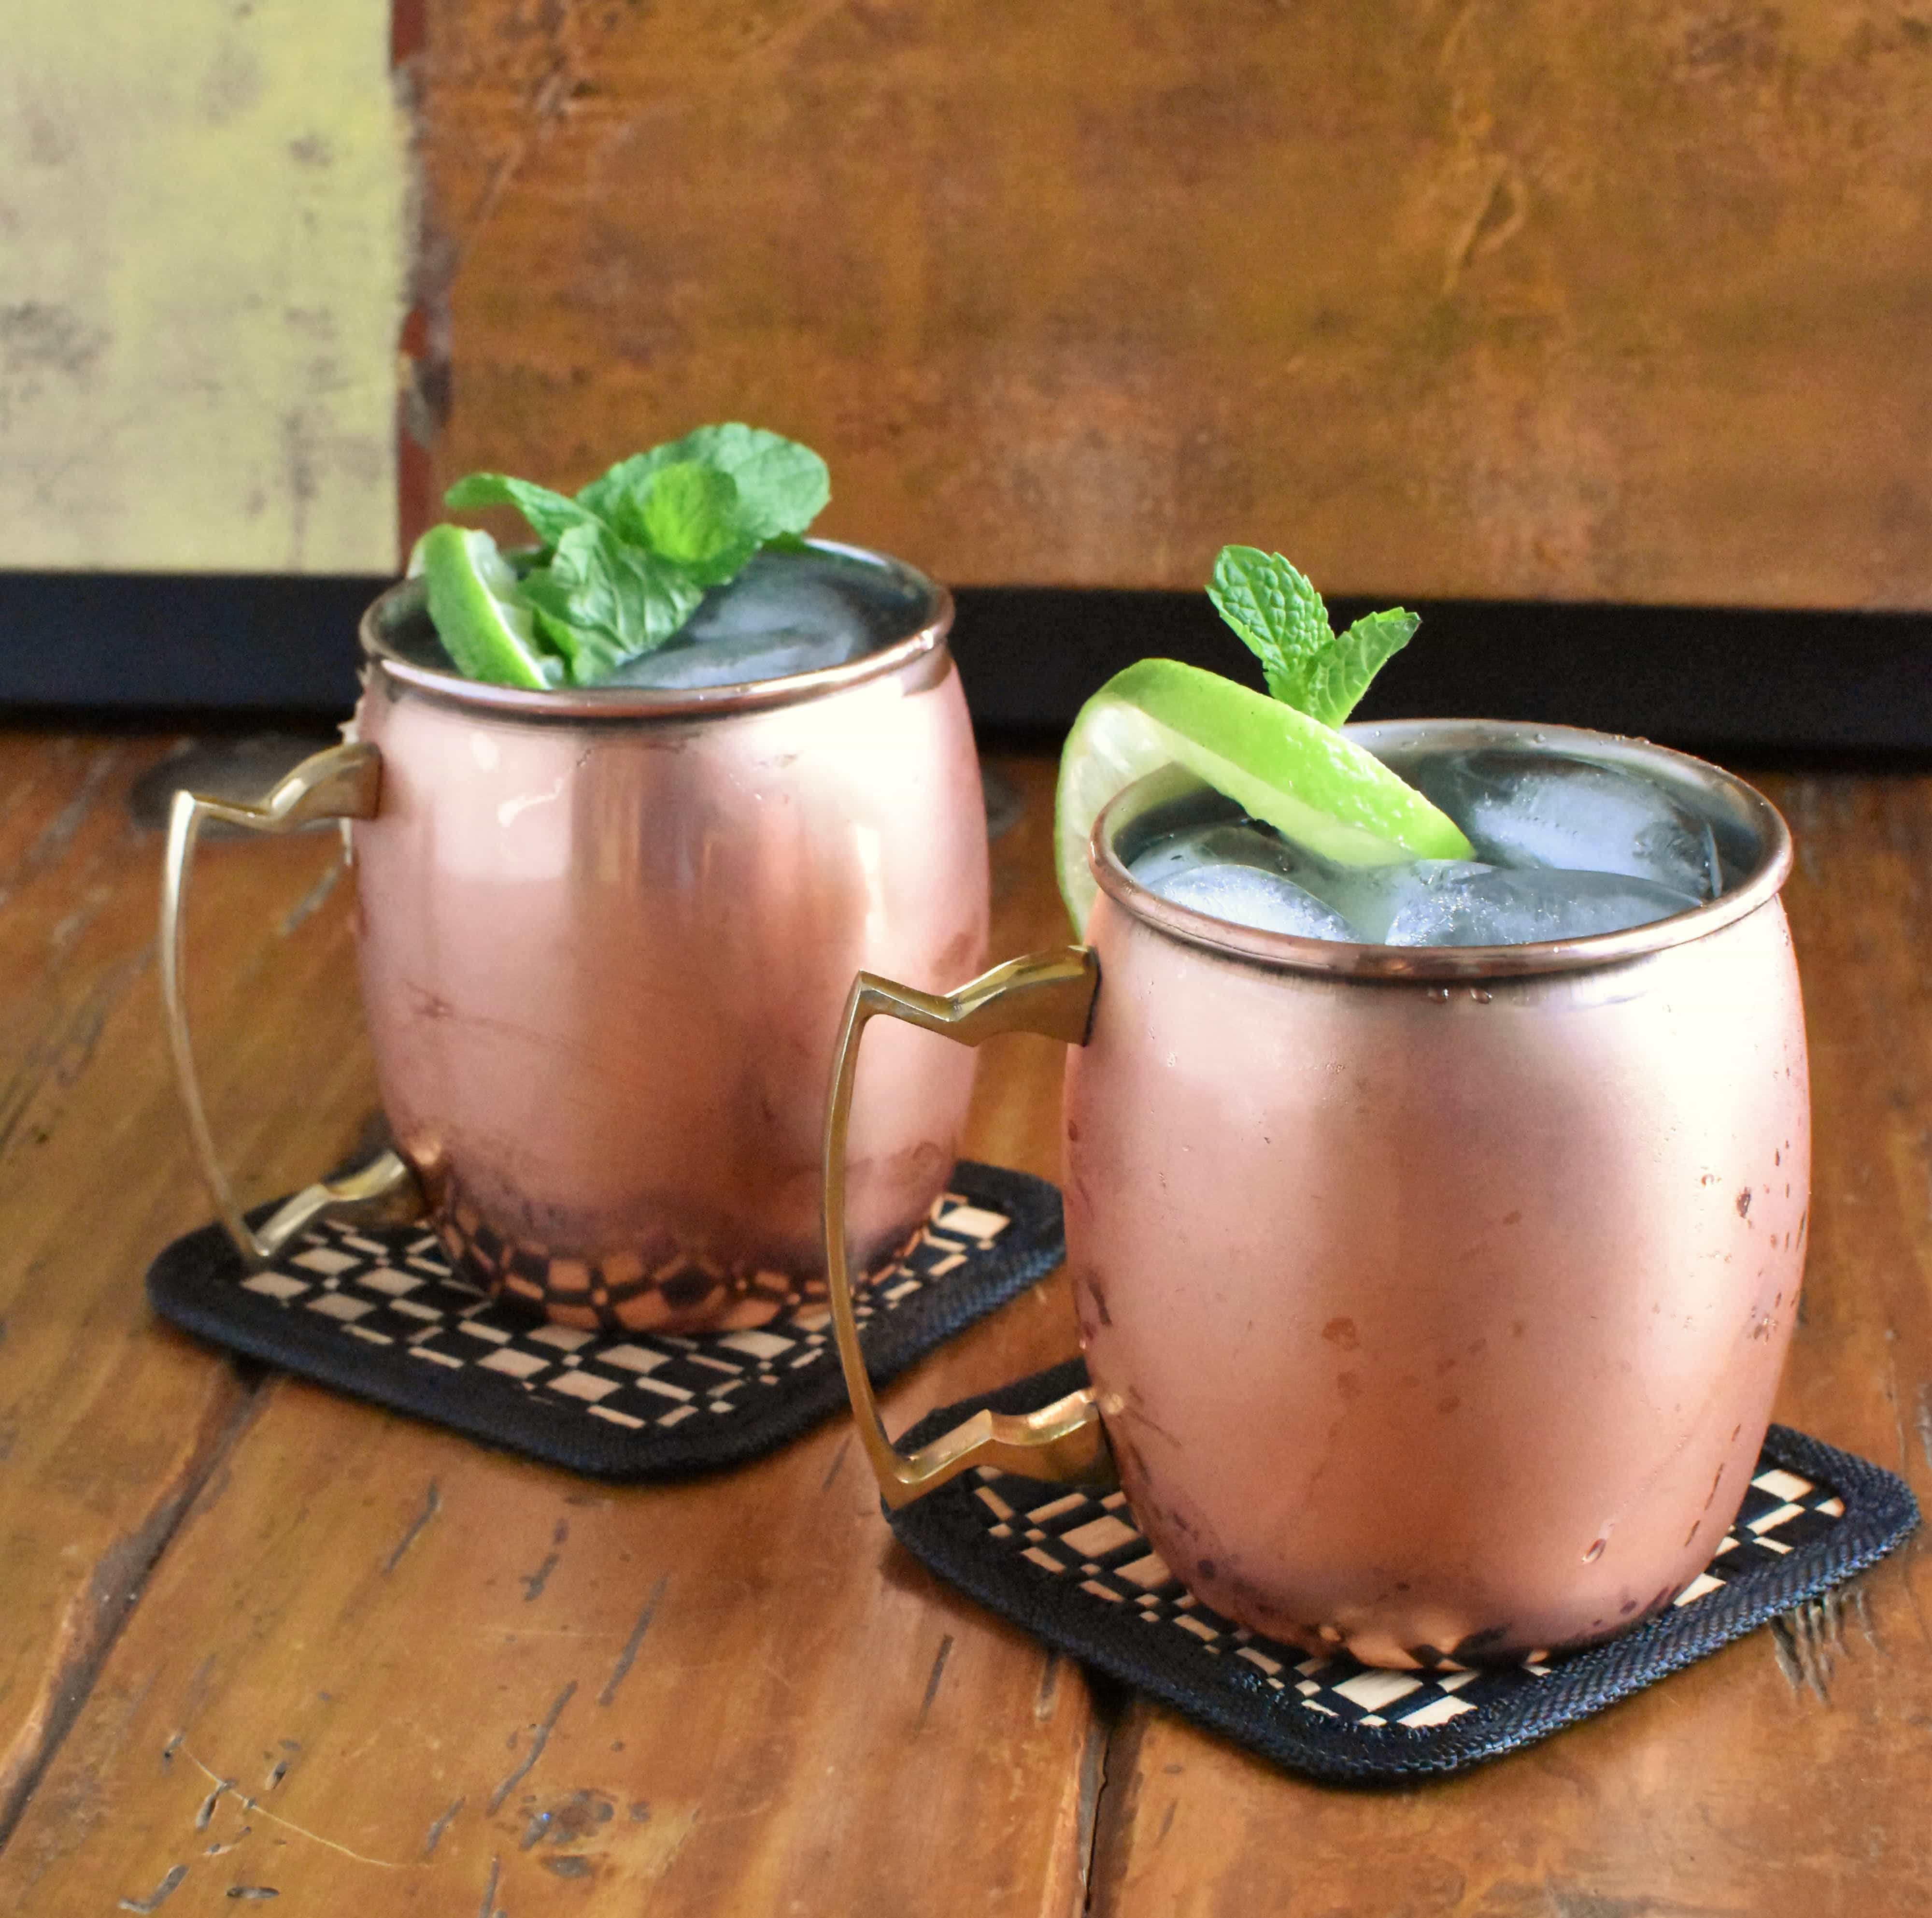 Moscow Mule - What the Heck is it Anyway? - The Spicy Apron